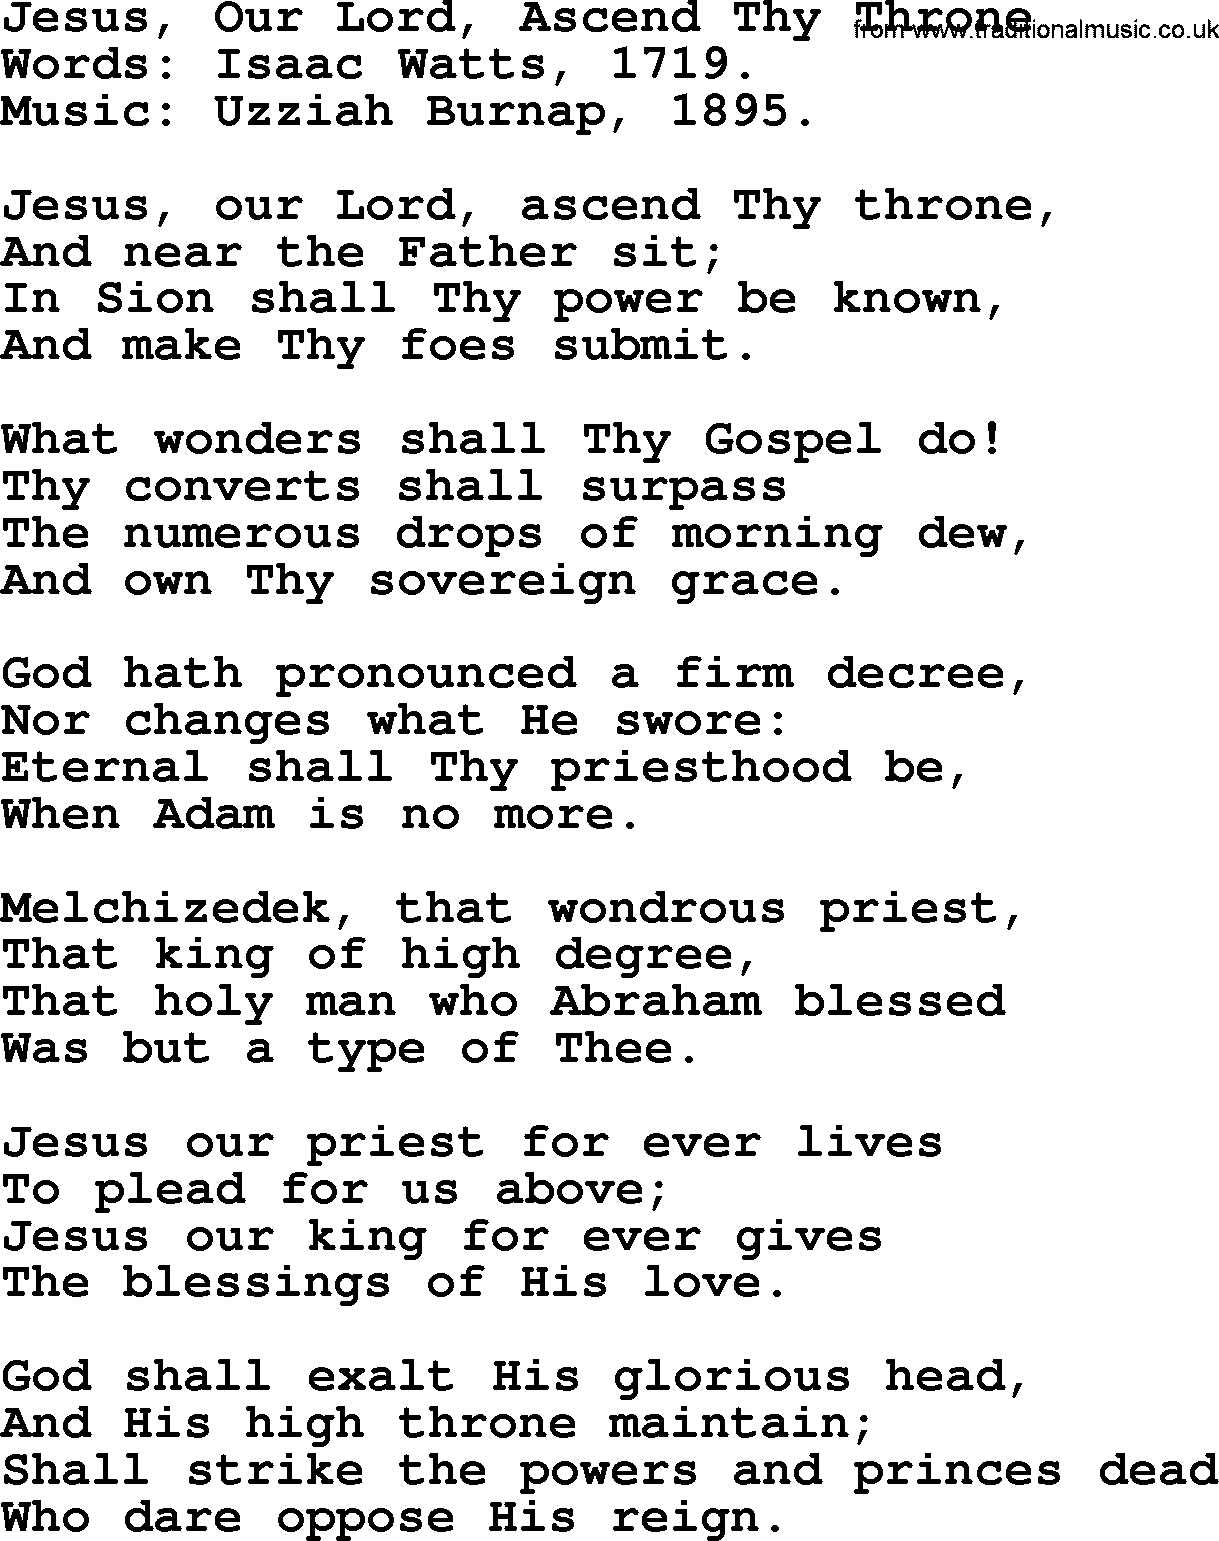 Isaac Watts Christian hymn: Jesus, Our Lord, Ascend Thy Throne- lyricss